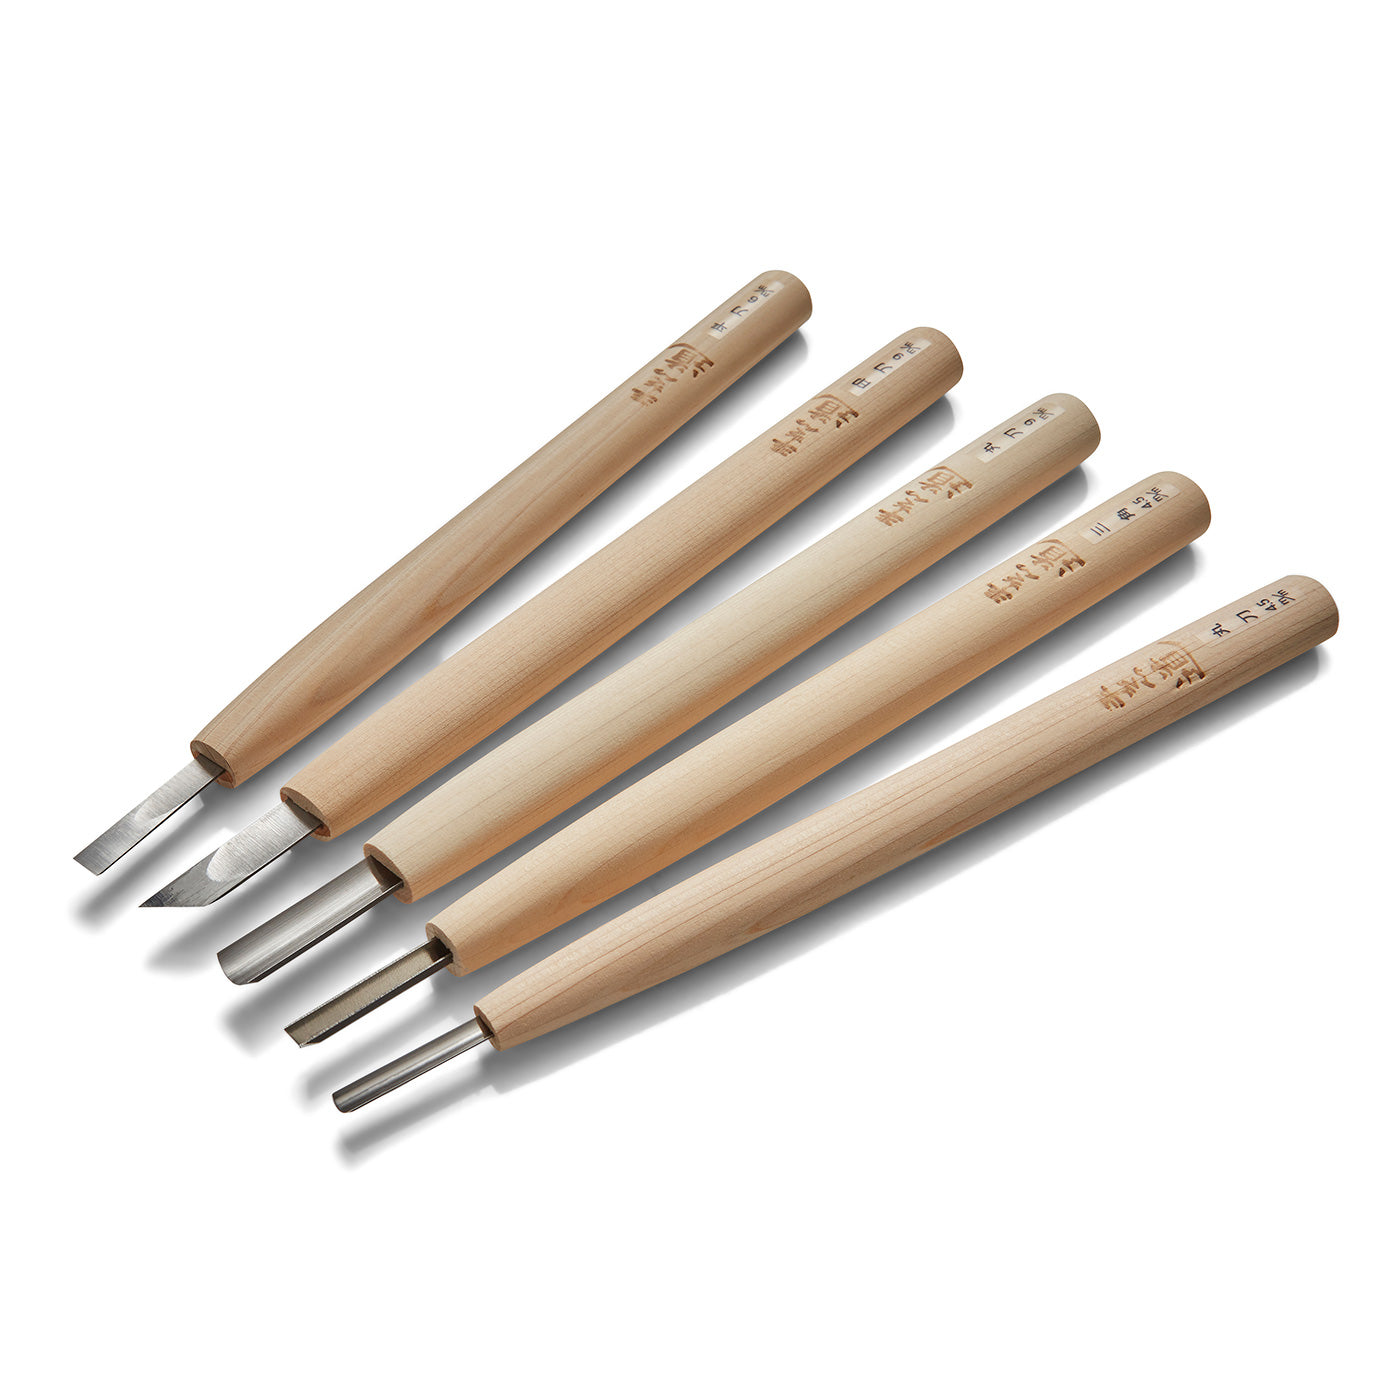 Japanese Carving Tools - Set of 5 